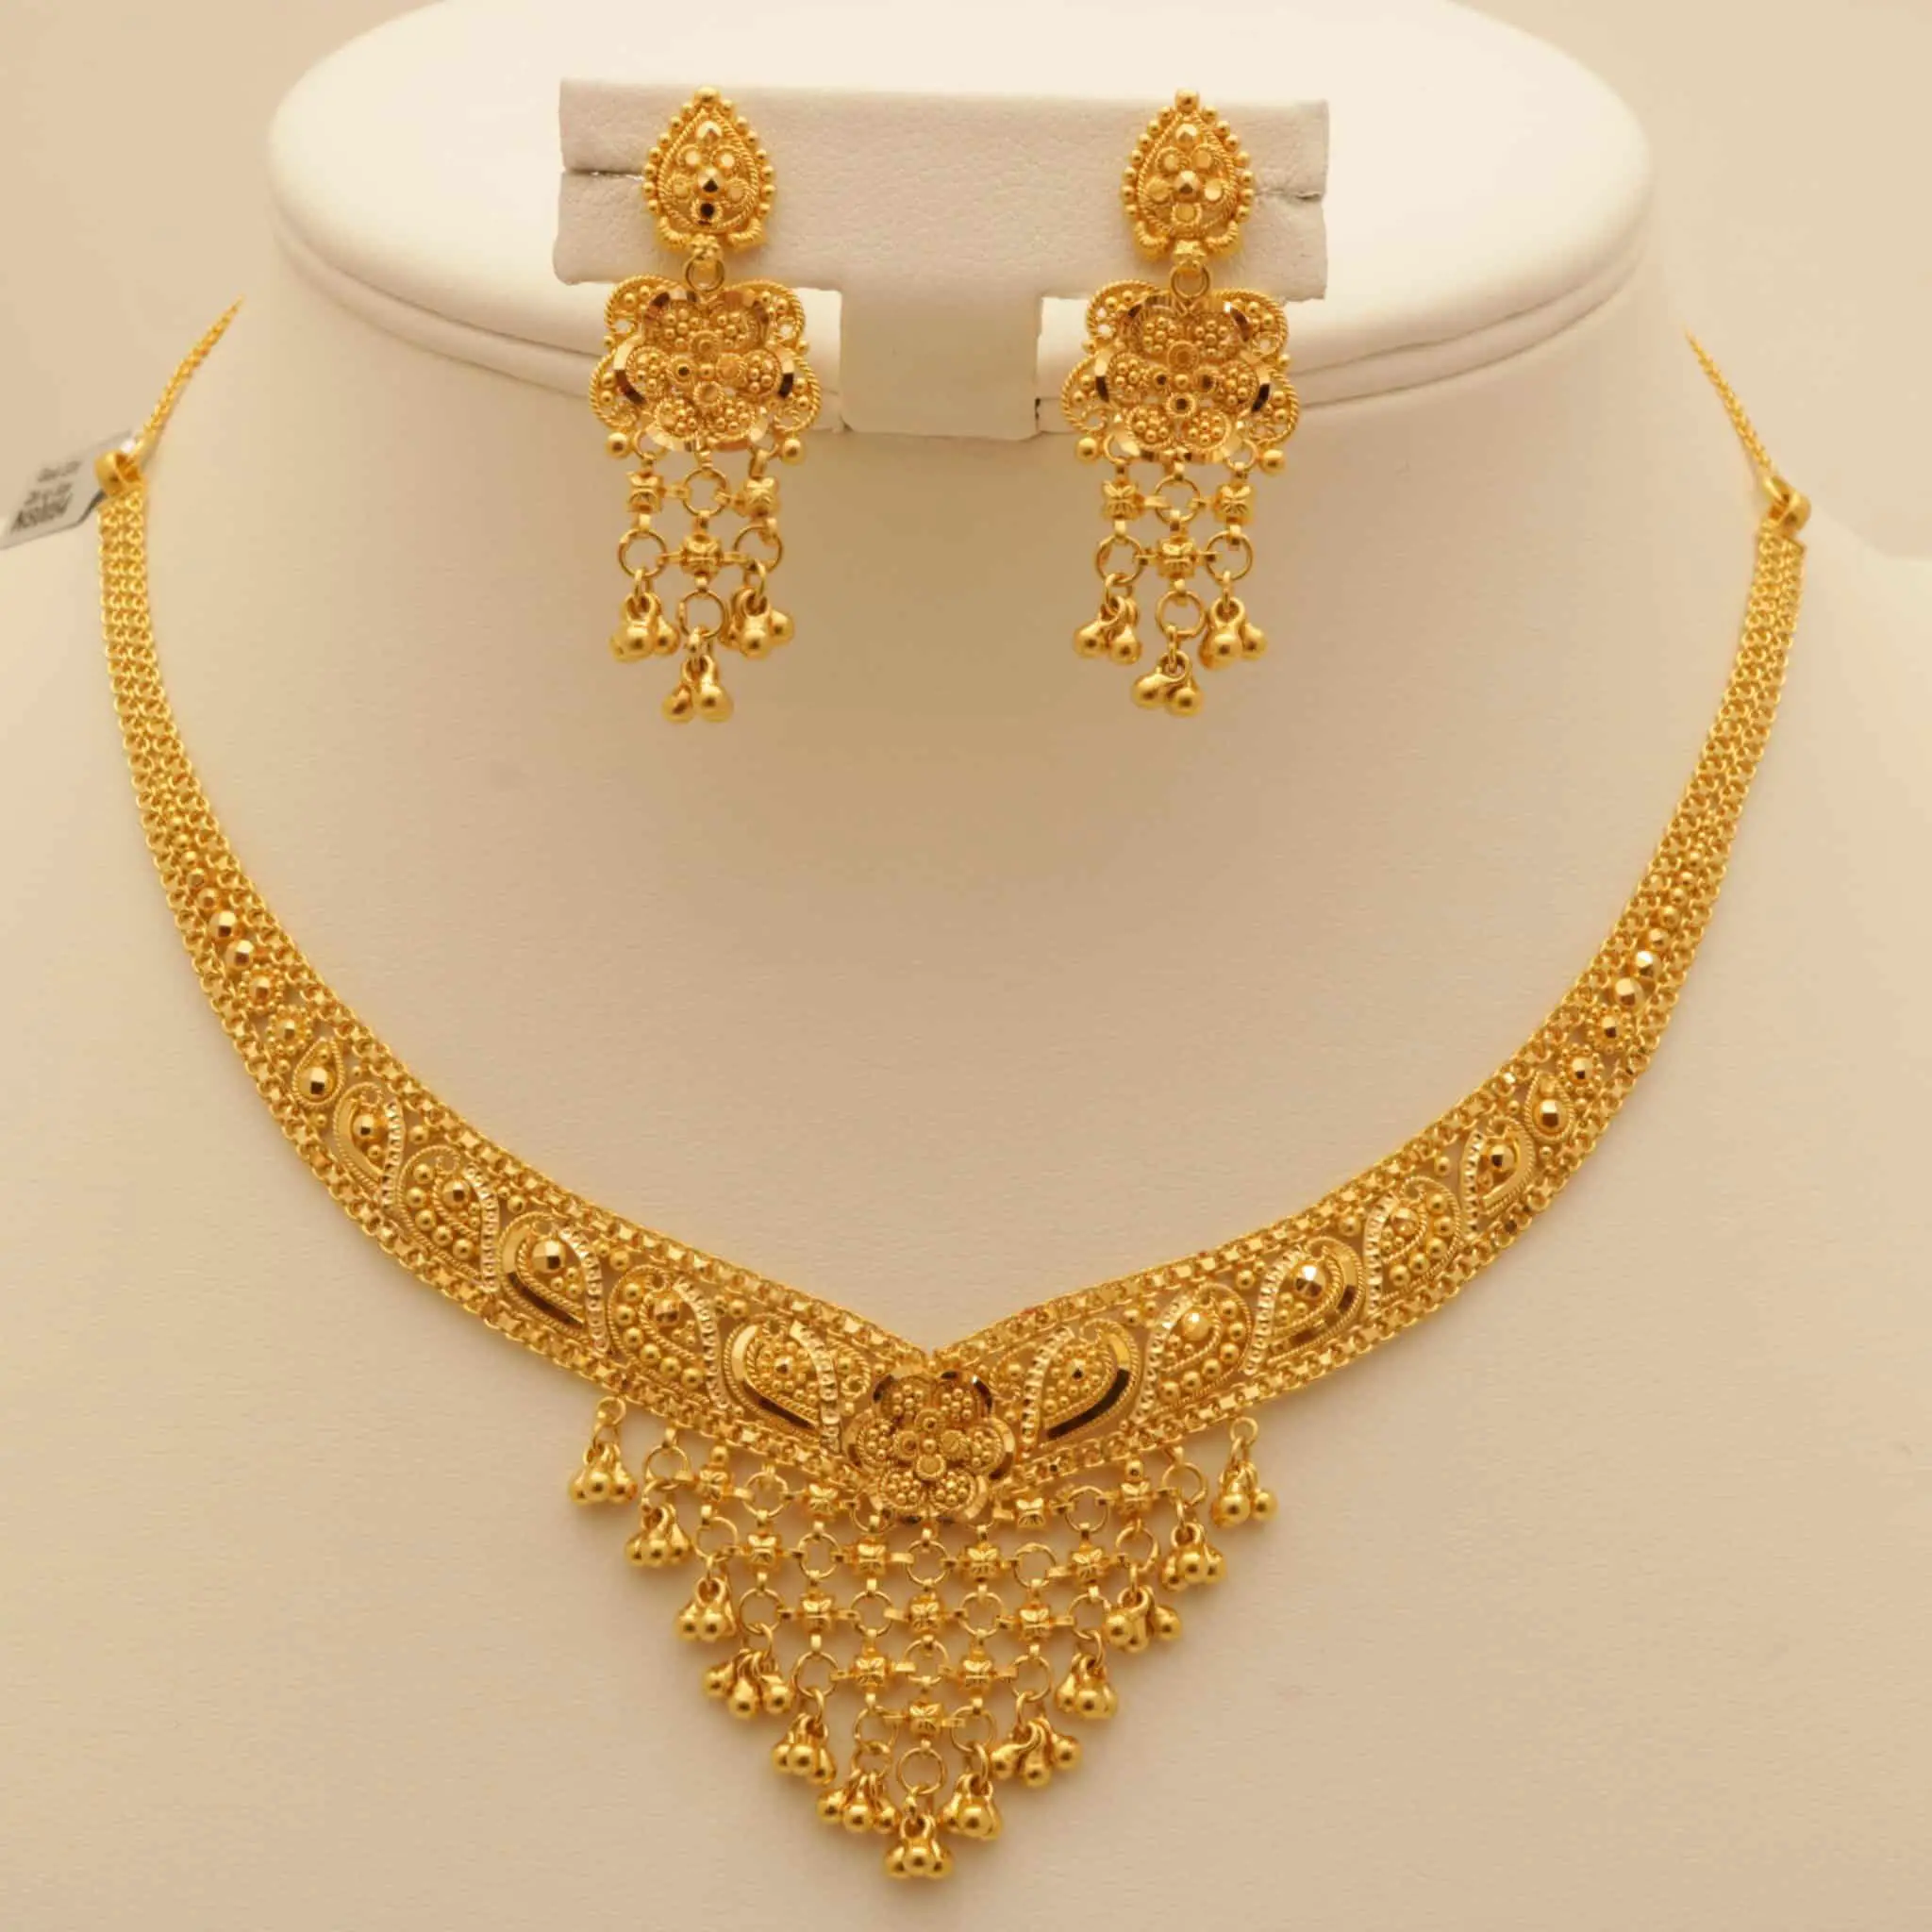 9 Awesome 50 Gram Gold Necklace Designs India